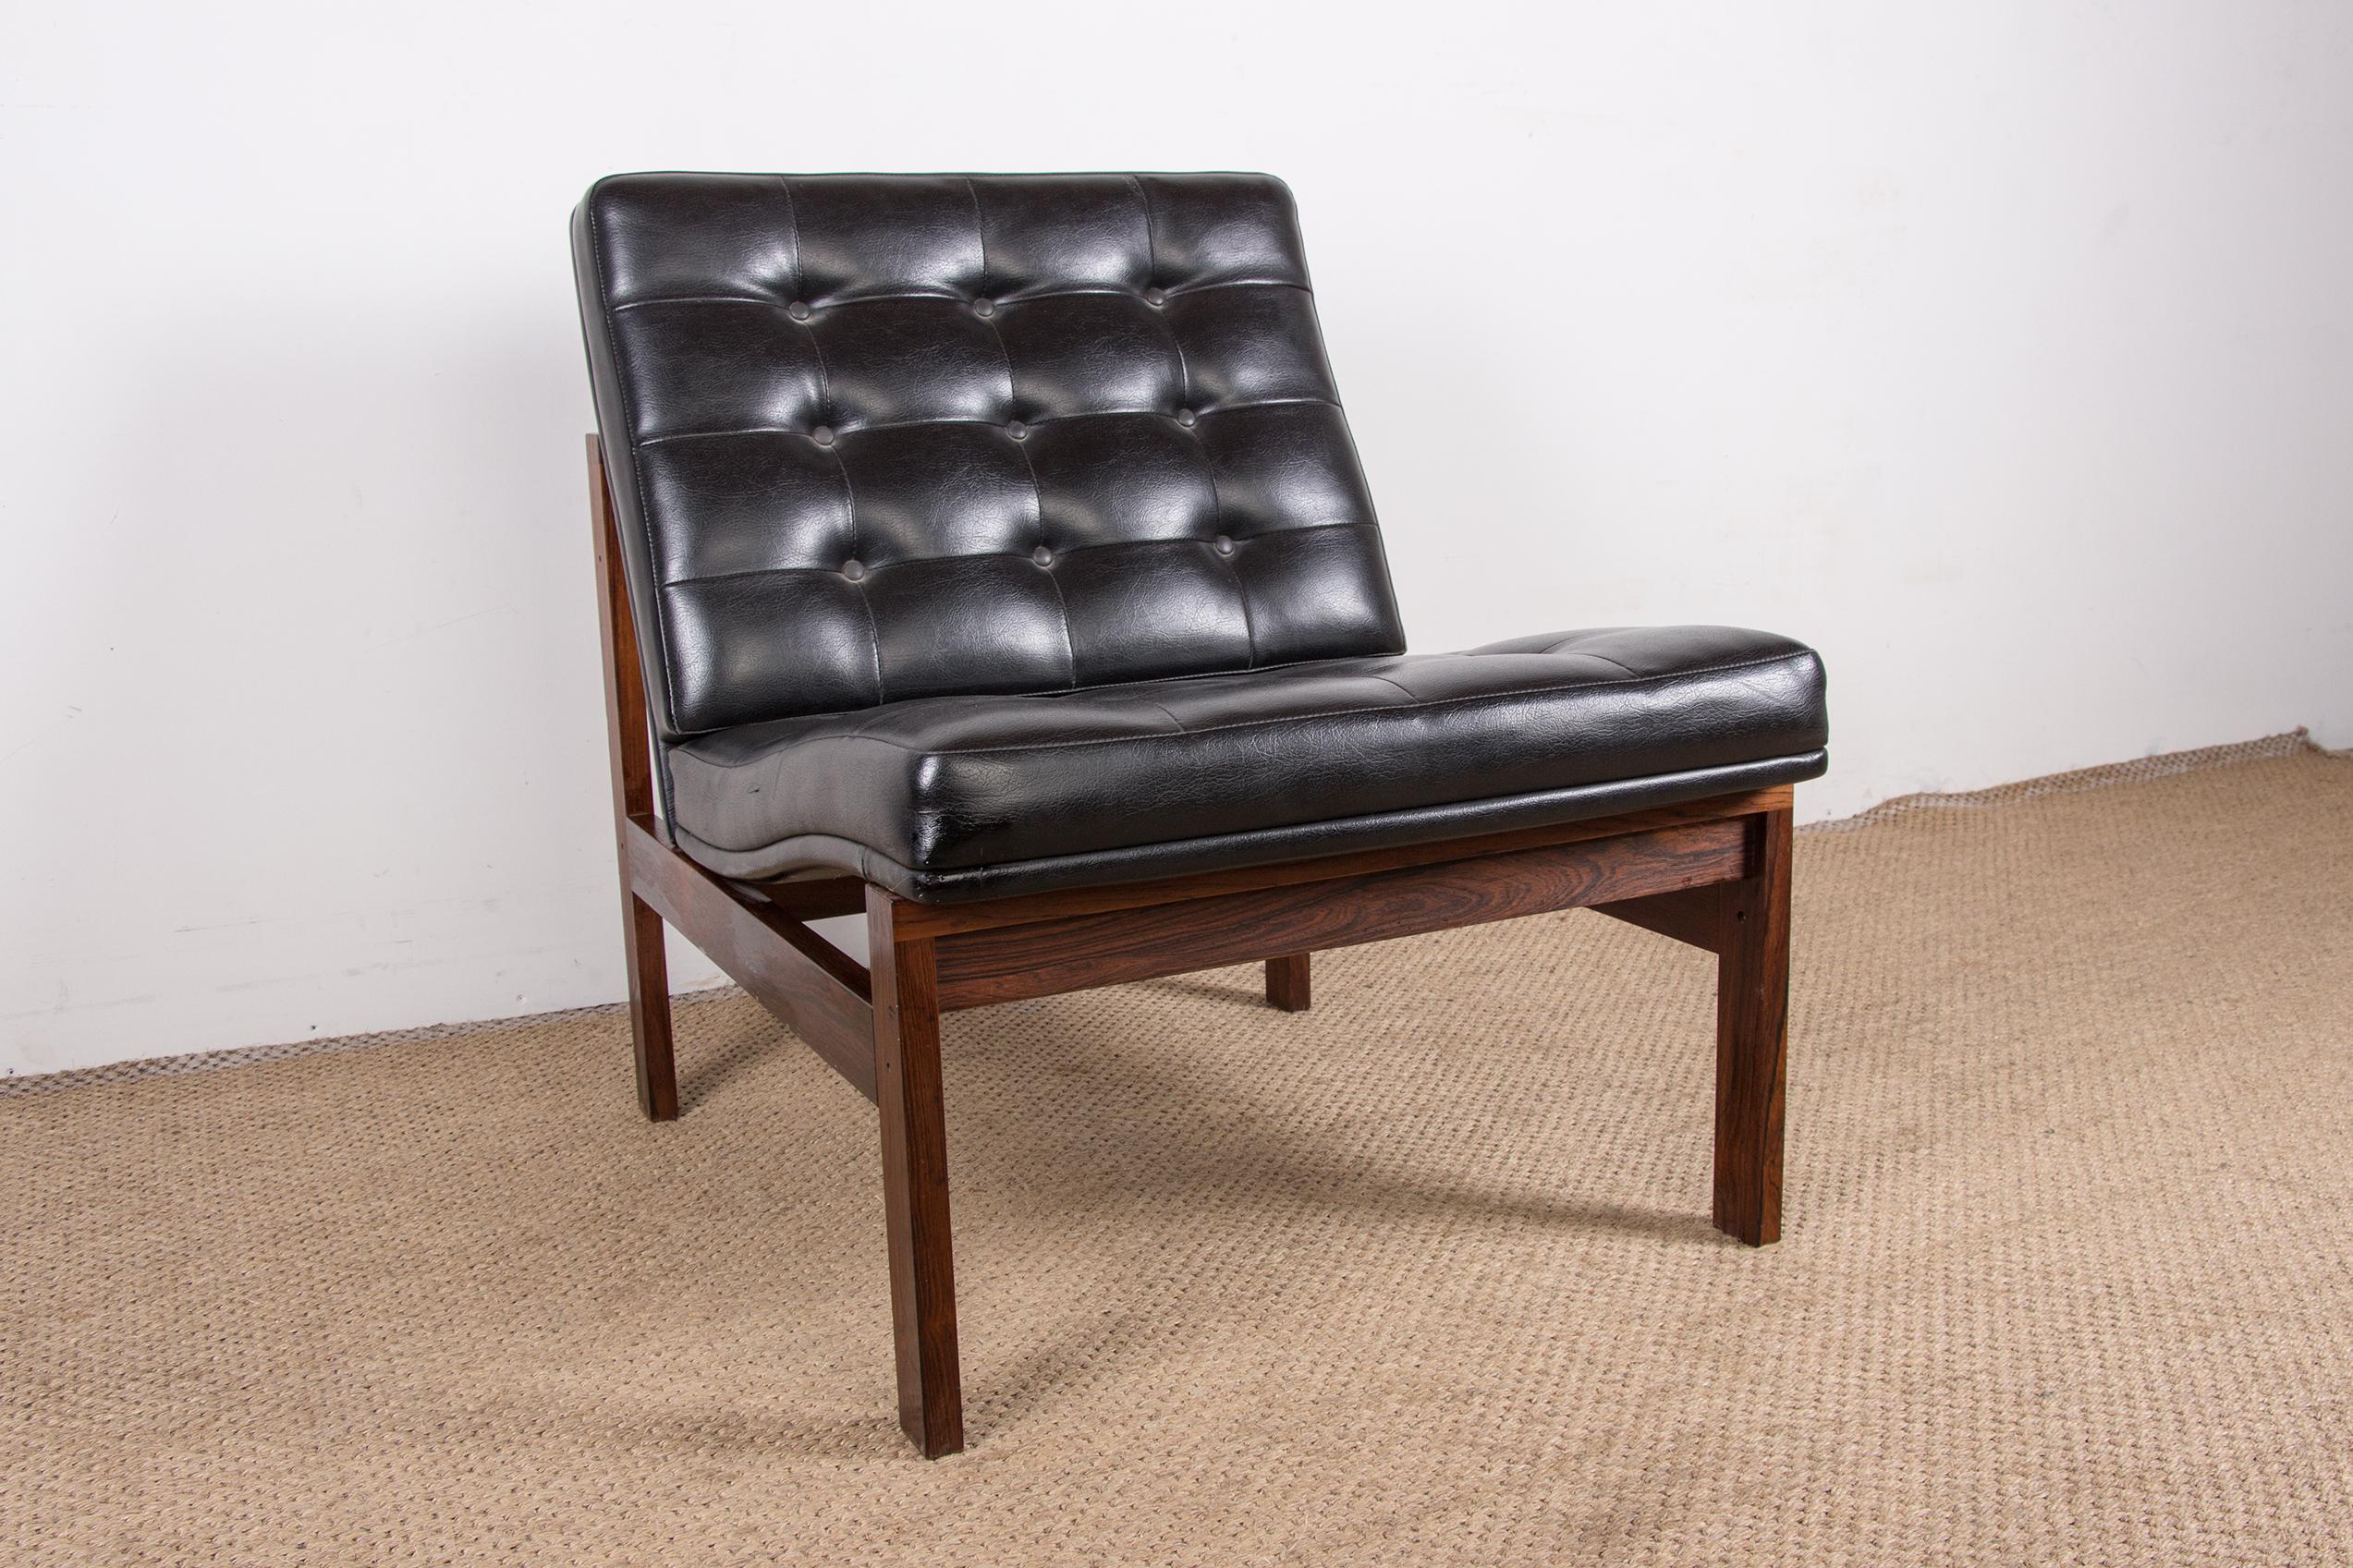 Superb Armchairs, Scandinavian Lounge Chairs. Leather seats and backs sewn in chesterfield, very comfortable. Sober and very elegant modernist design. Very nice furniture.